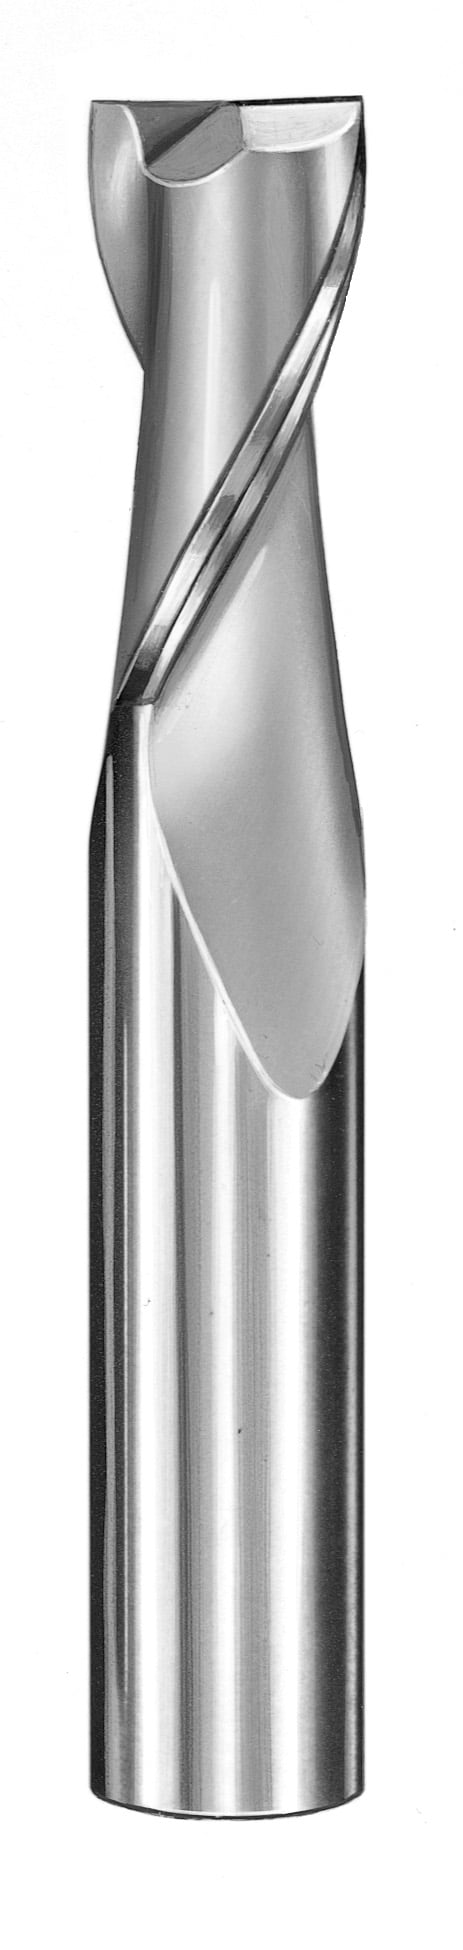 3/8" Dia, 2 Flute, Square End End Mill - 91286